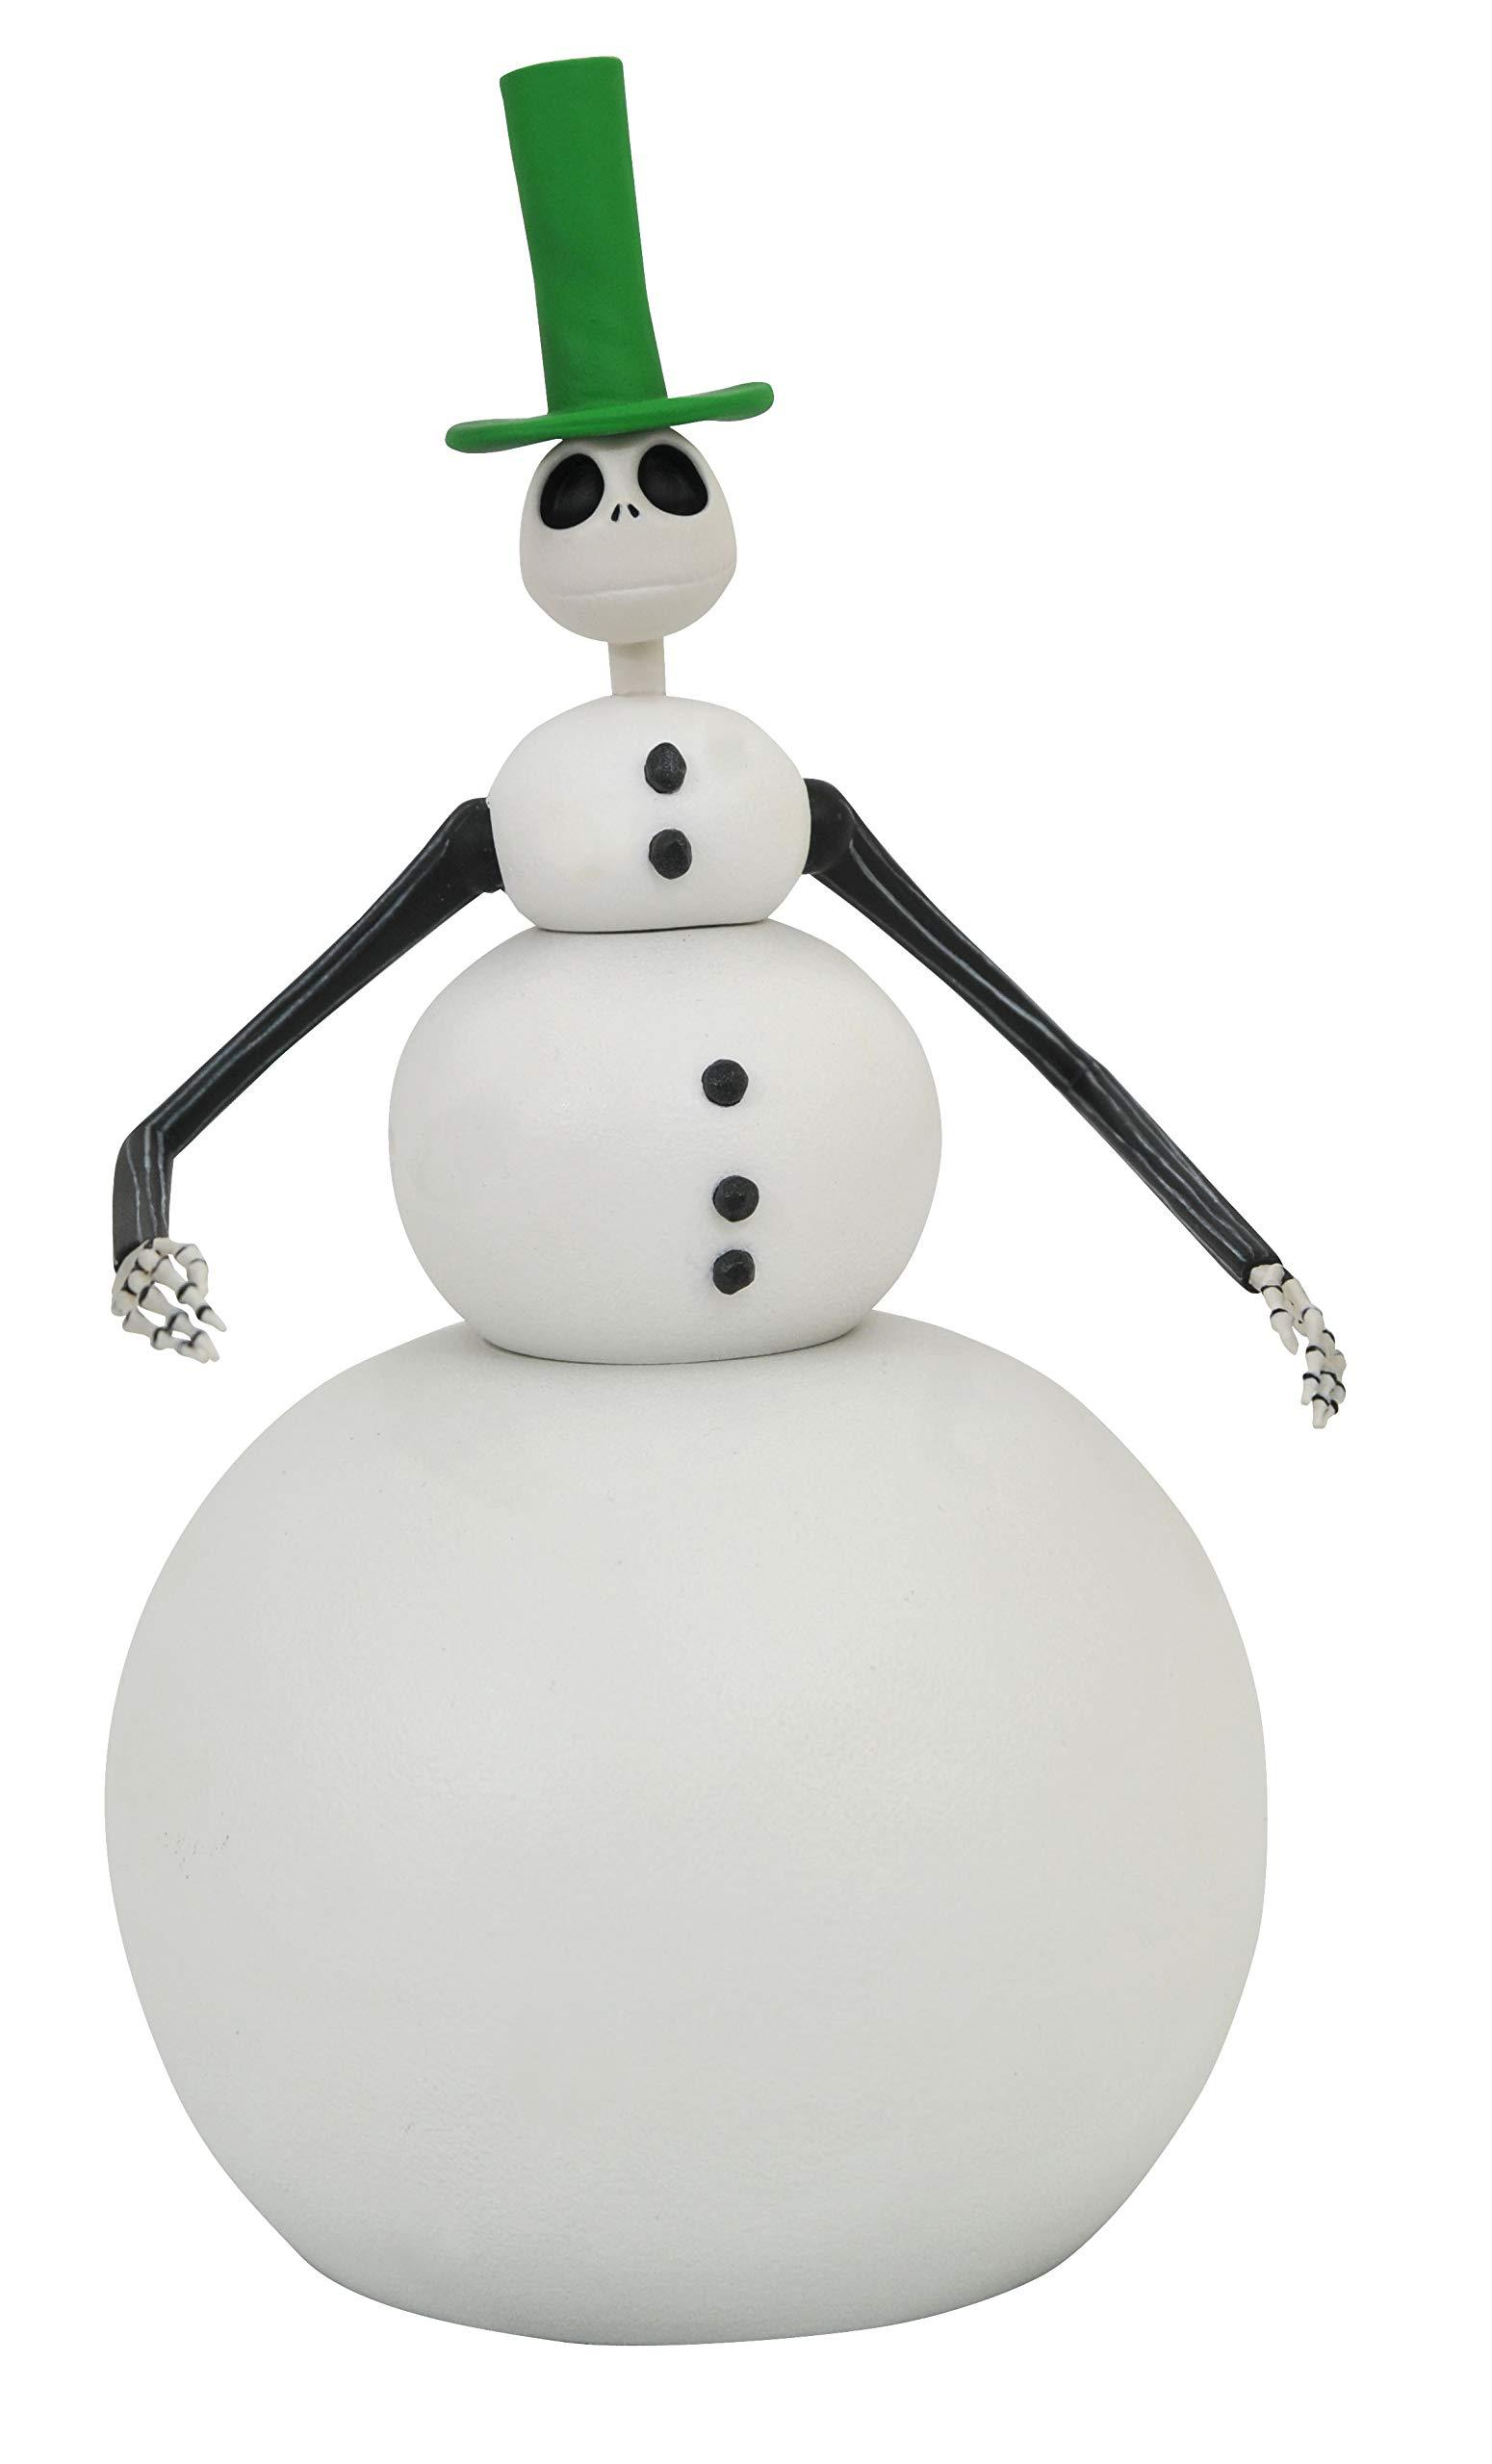 diamond select toys the nightmare before christmas: snowman jack select action figure, multicolor